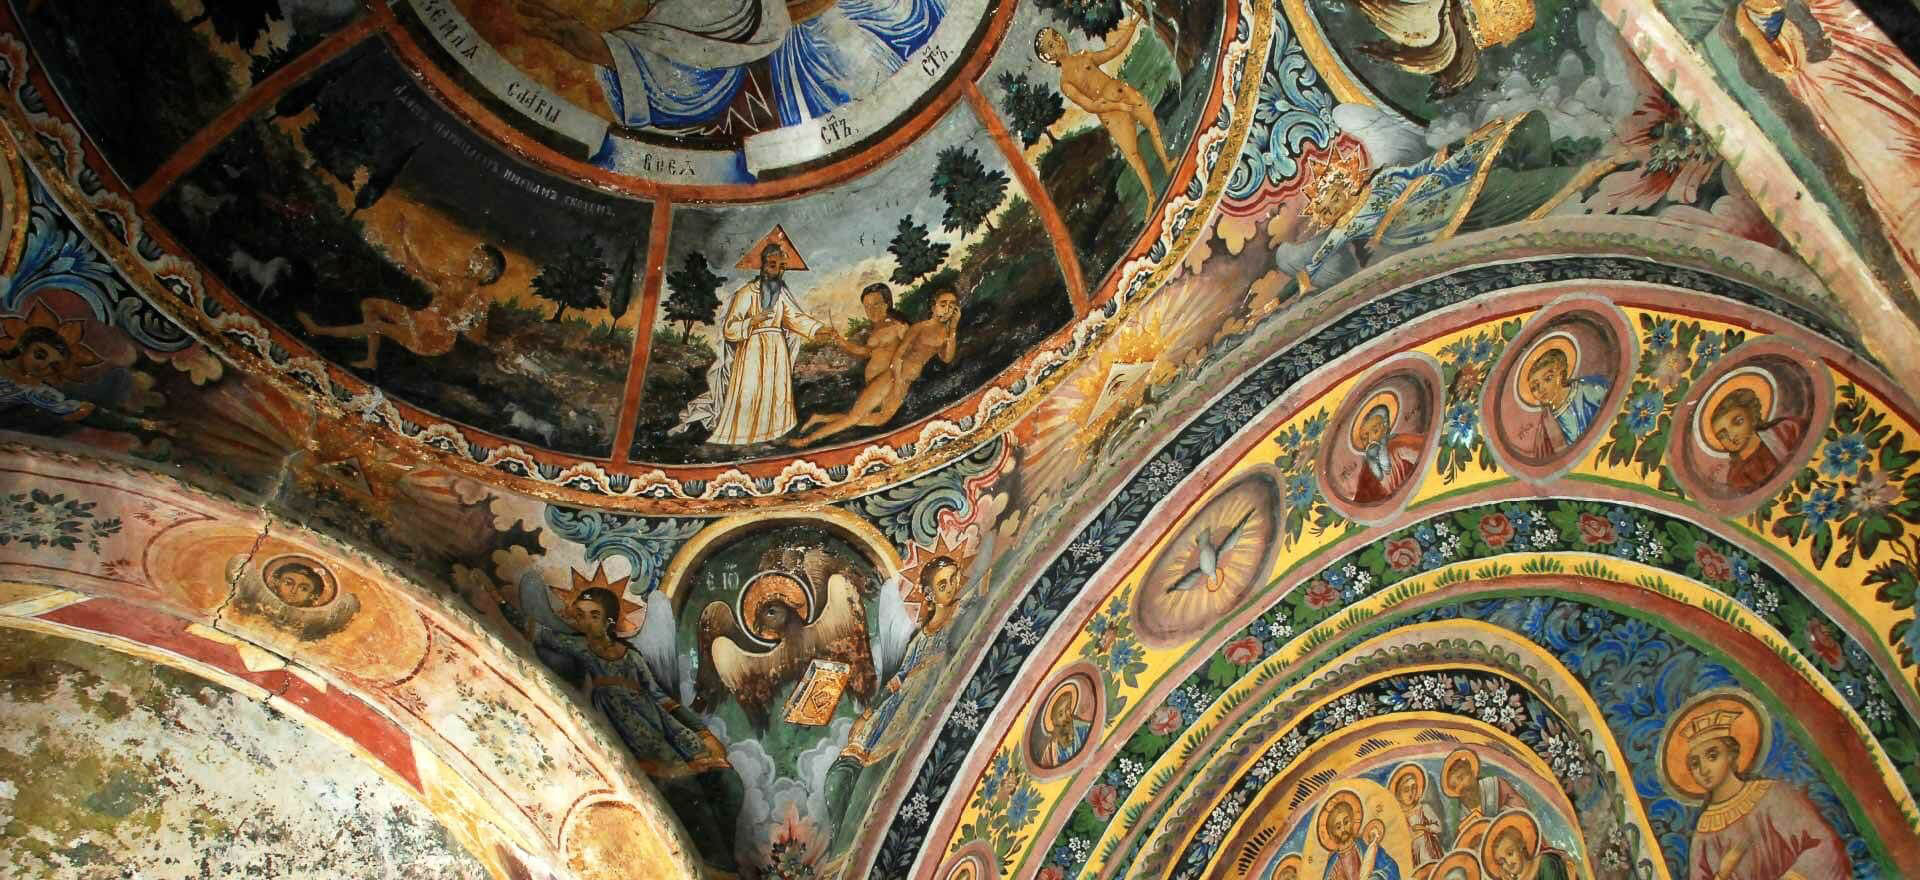 Church interior decorated with frescoes - Bulgaria tours